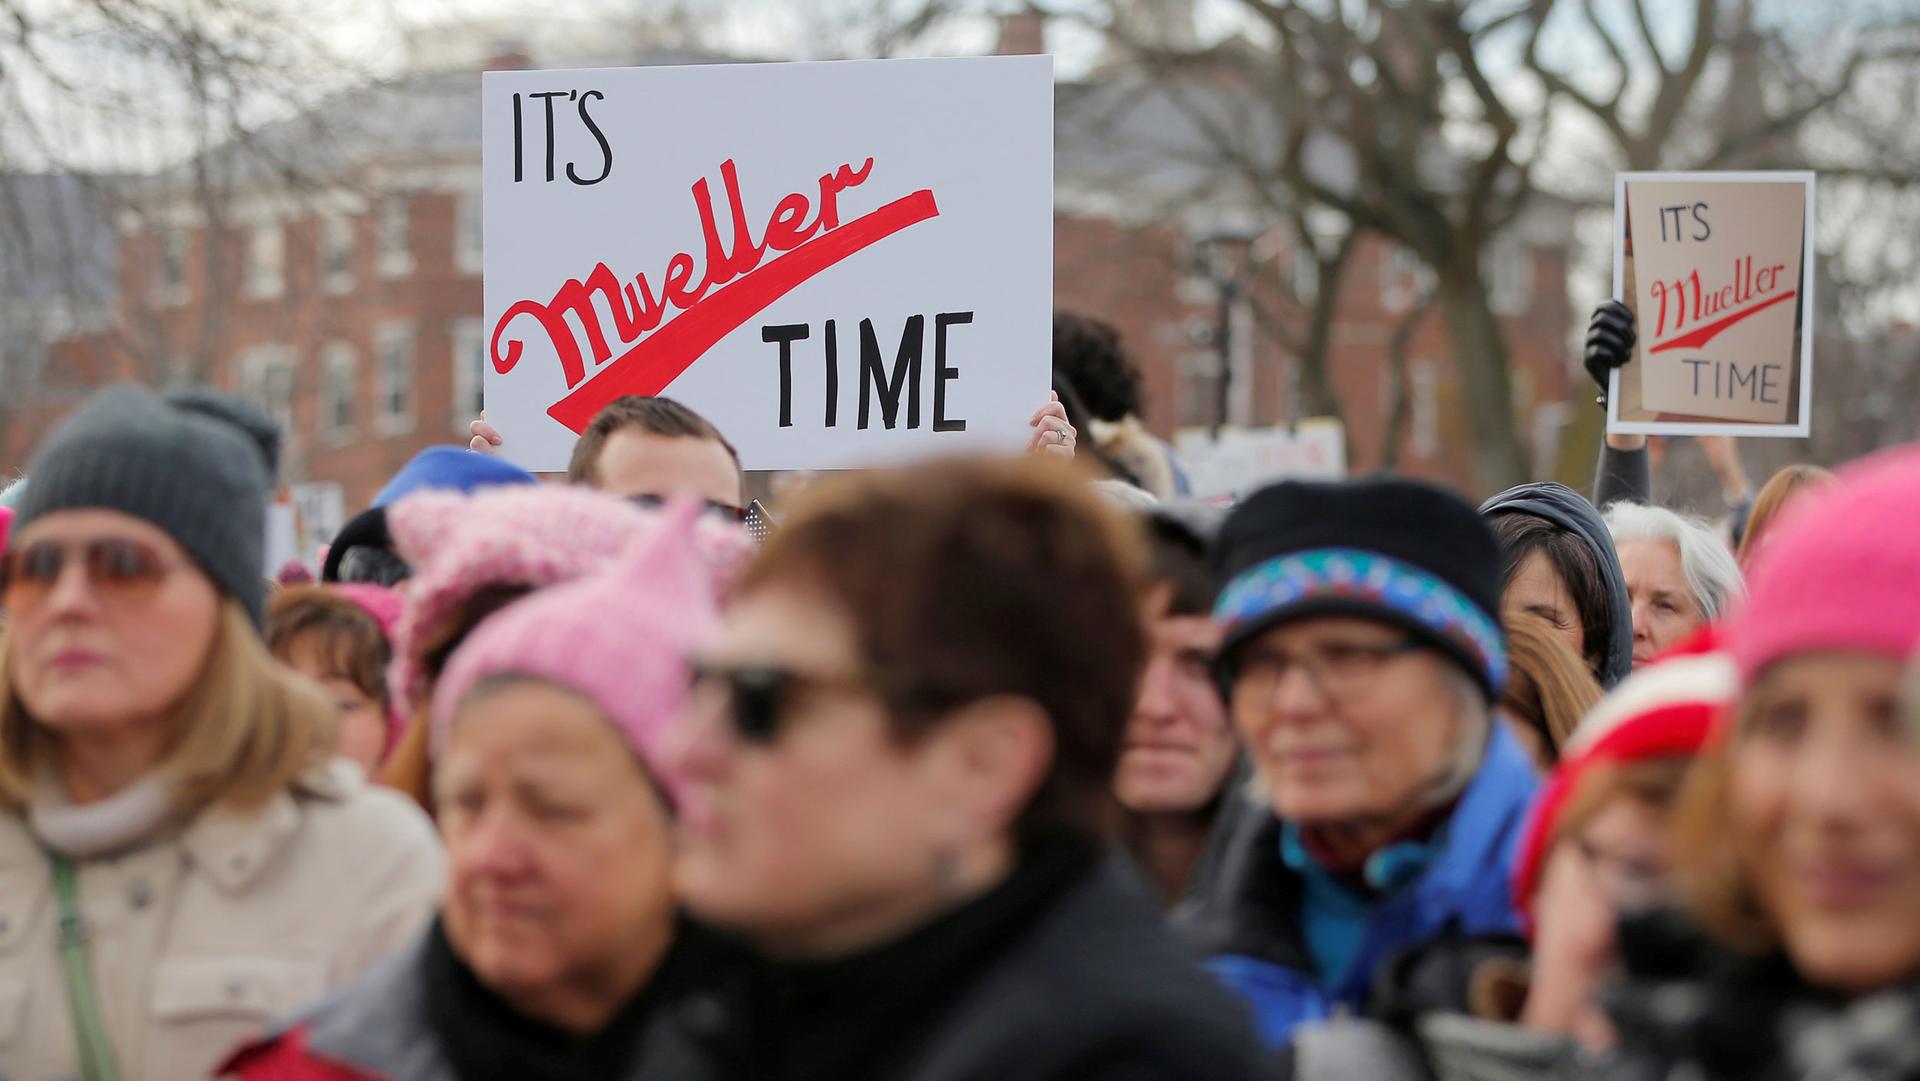 Protesters hold signs that say "It's Mueller time" riffing of Miller Lite's "Miller time" advertisements. 